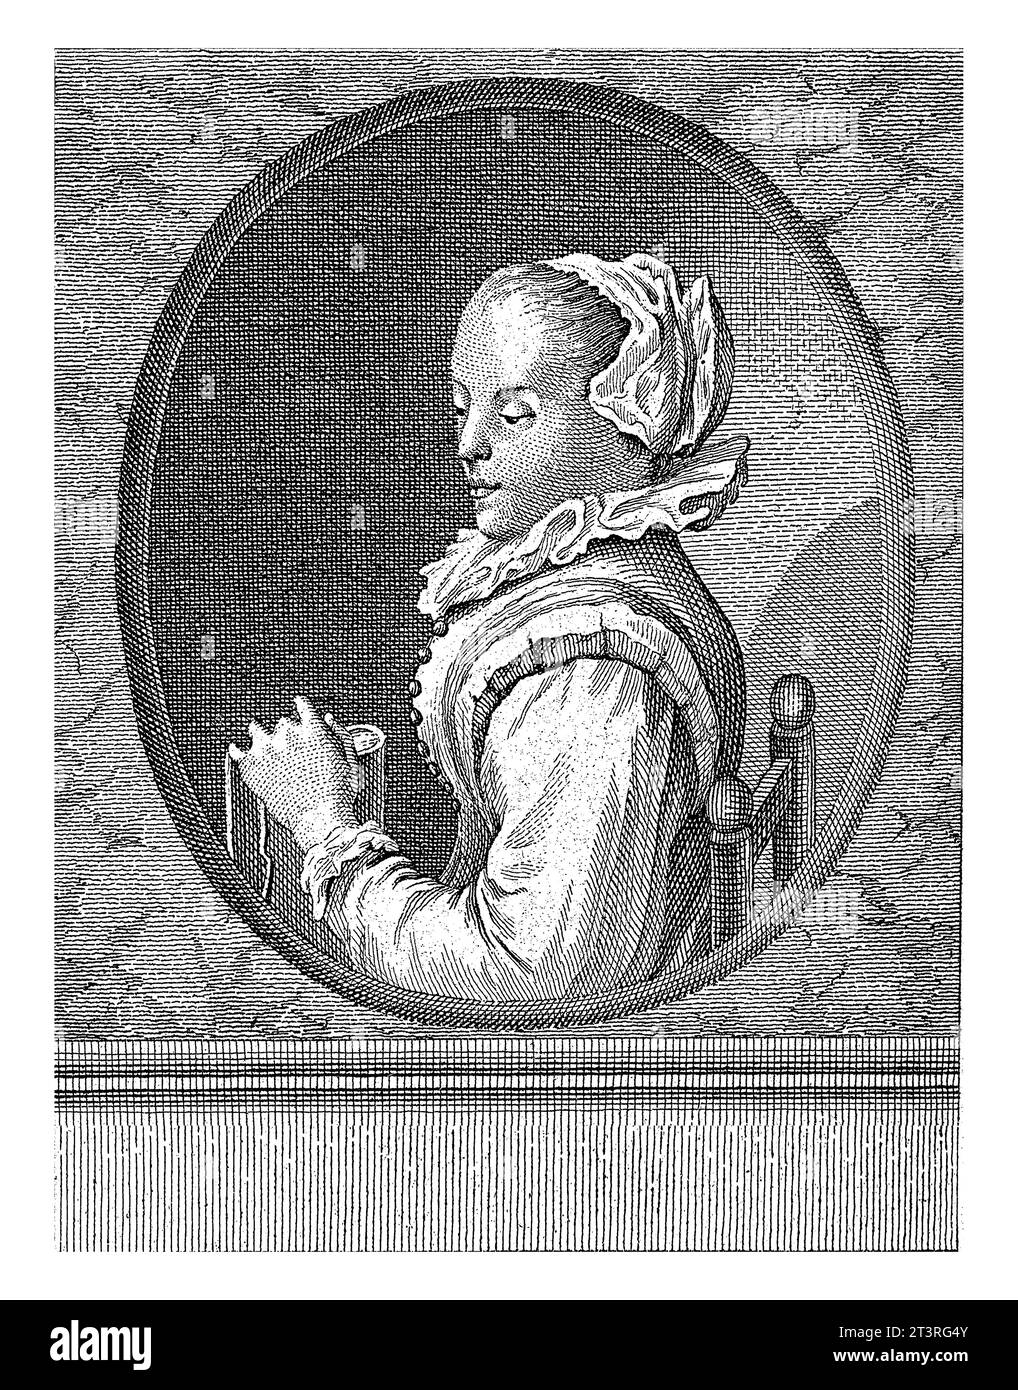 Portrait of Anna Roemers Visscher, Carel Jacob de Huyser, 1763 - 1804 Anna Roemers Visscher, poet and glass engraver, sitting on a chair, a book in he Stock Photo